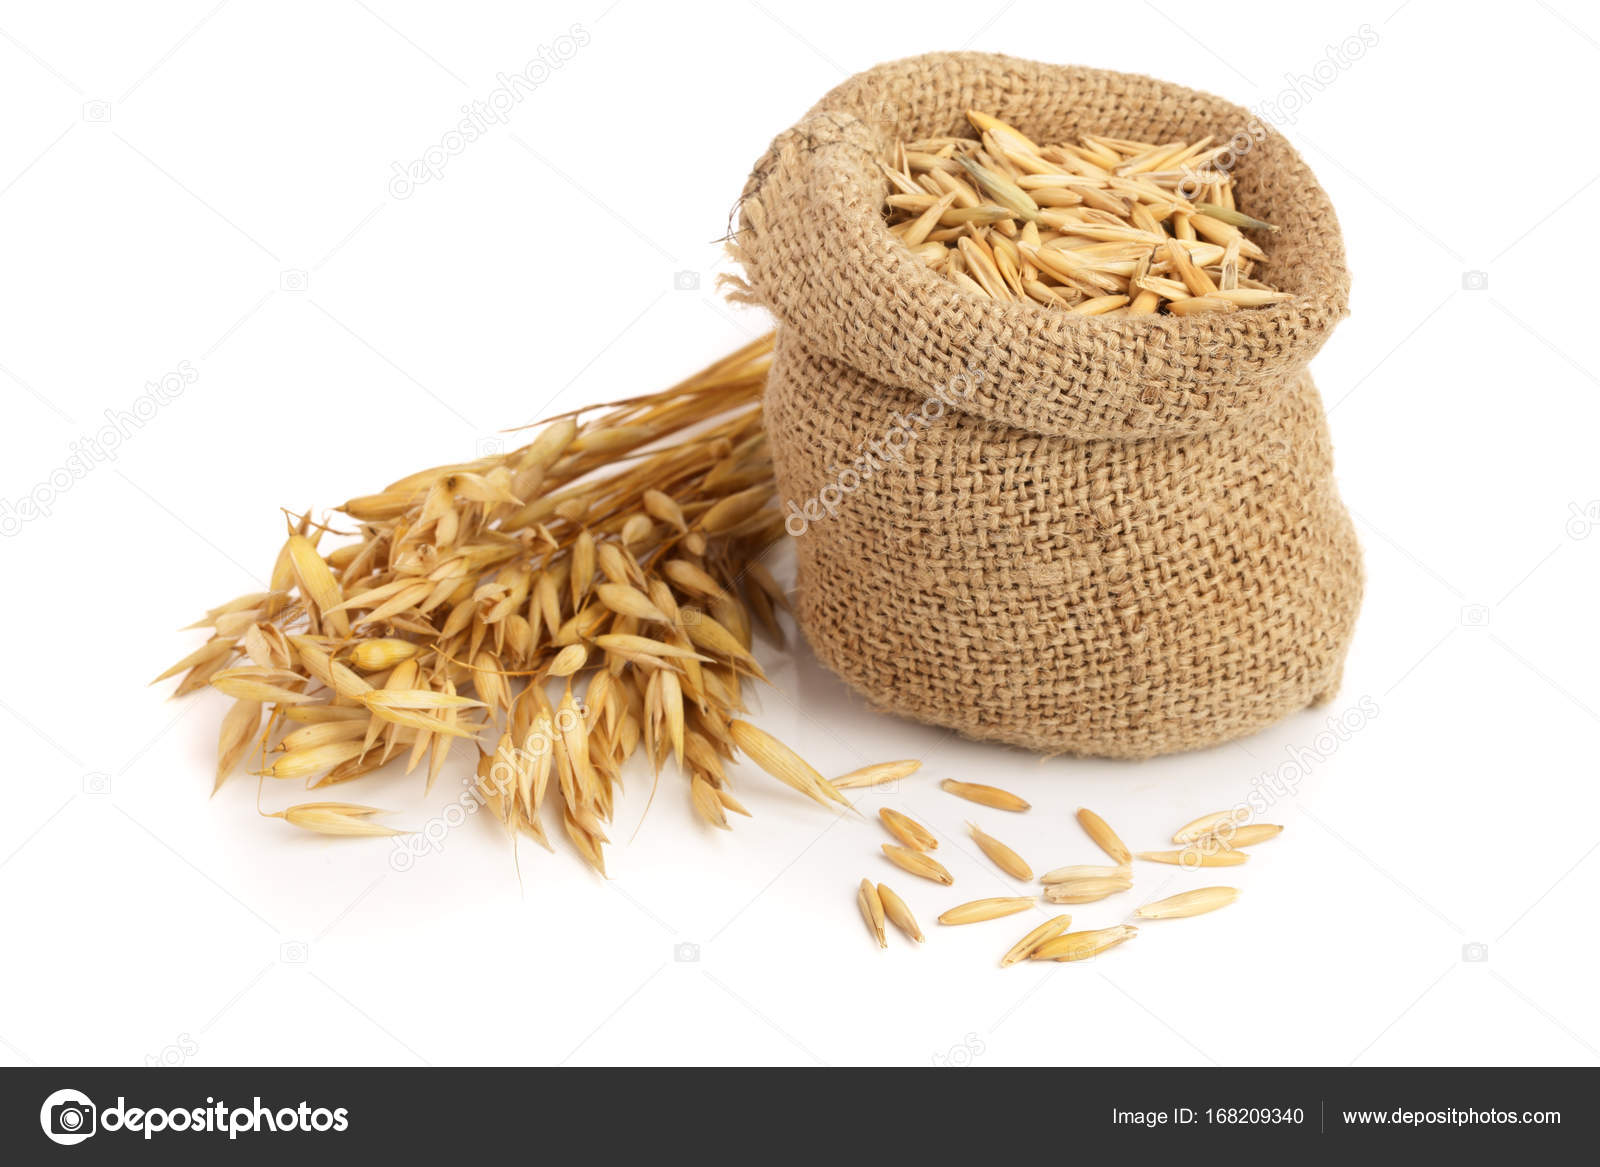 Download Bag Of Oats Stock Photos Royalty Free Bag Of Oats Images Depositphotos Yellowimages Mockups